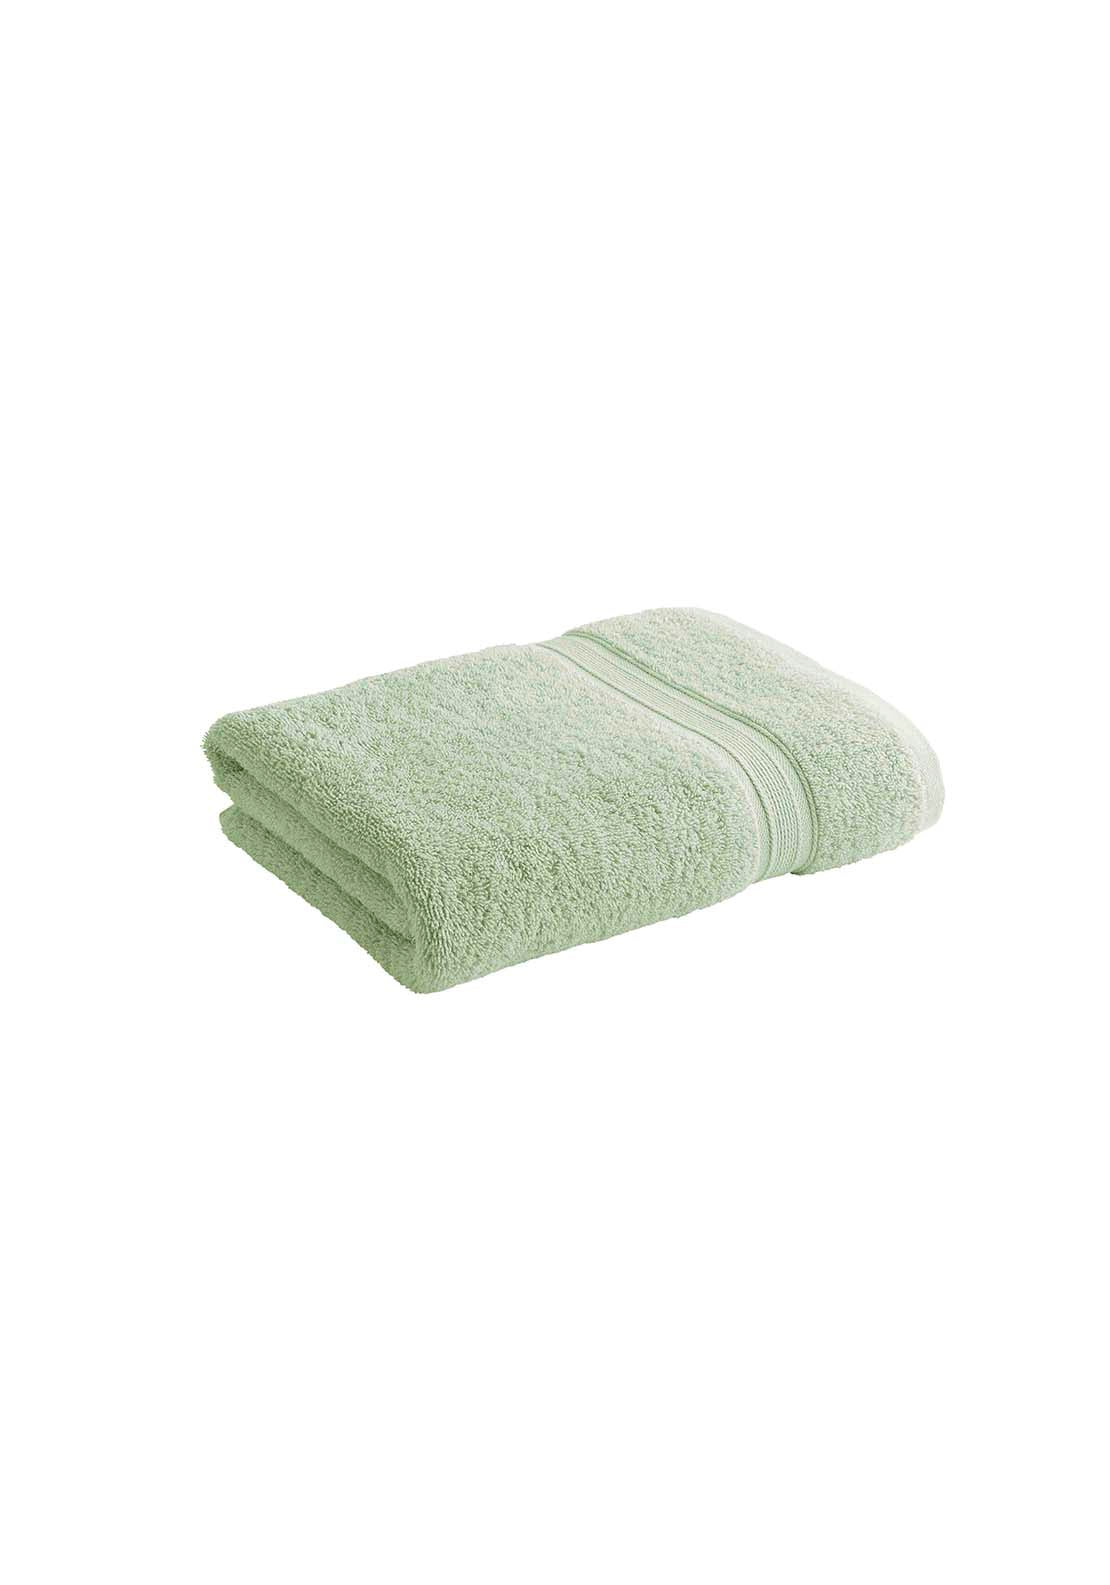 Christy Serene Hand Towel - Cucumber 1 Shaws Department Stores